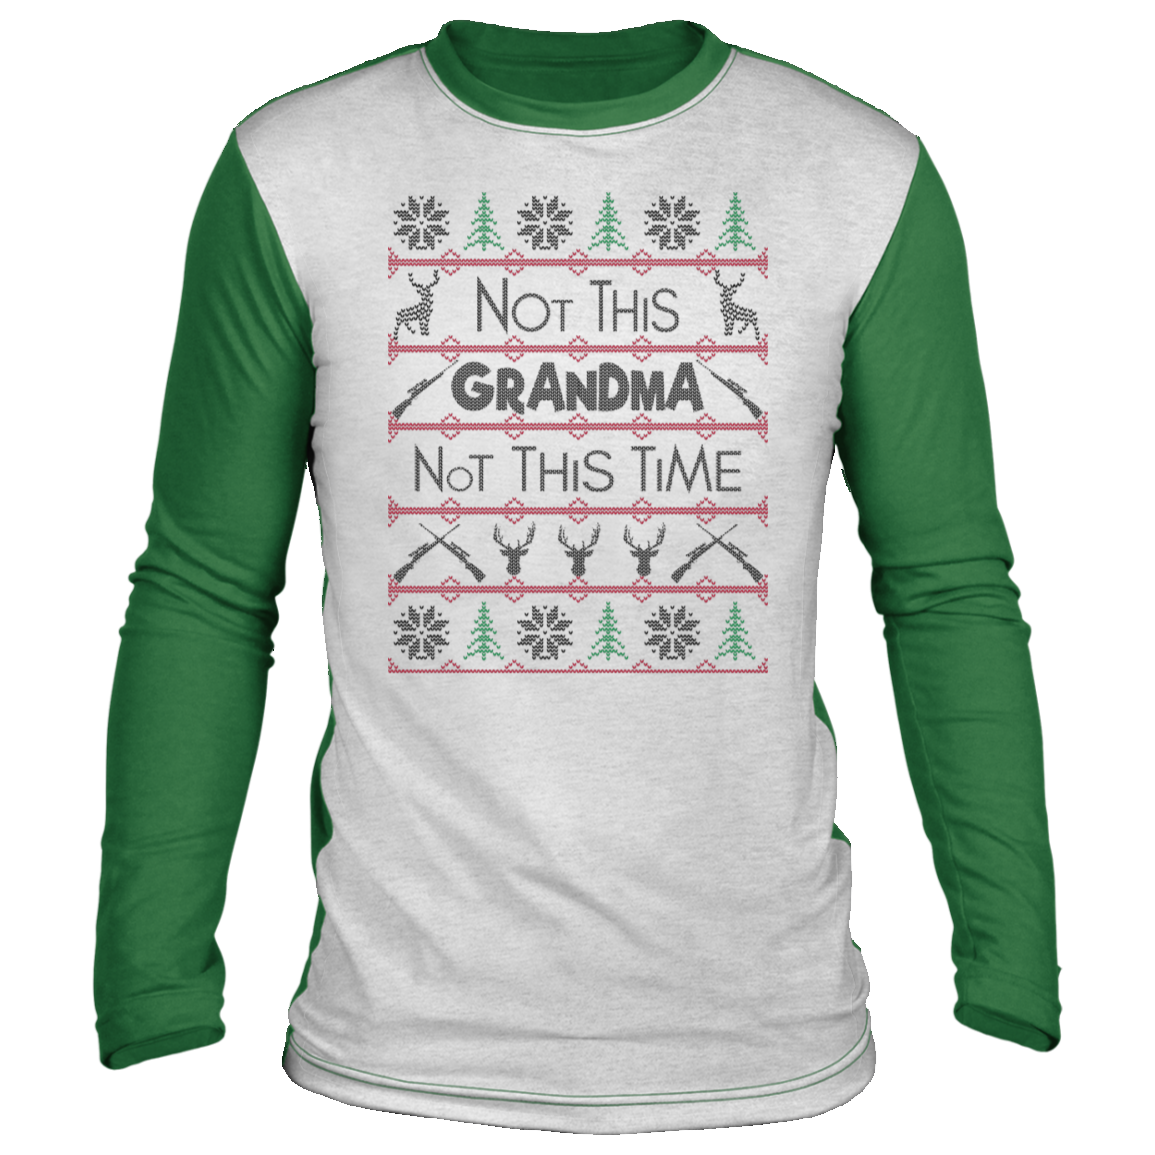 Not This Grandma, Funny Ugly Christmas ‘sweater’ Long Sleeve - GoneBold.gift